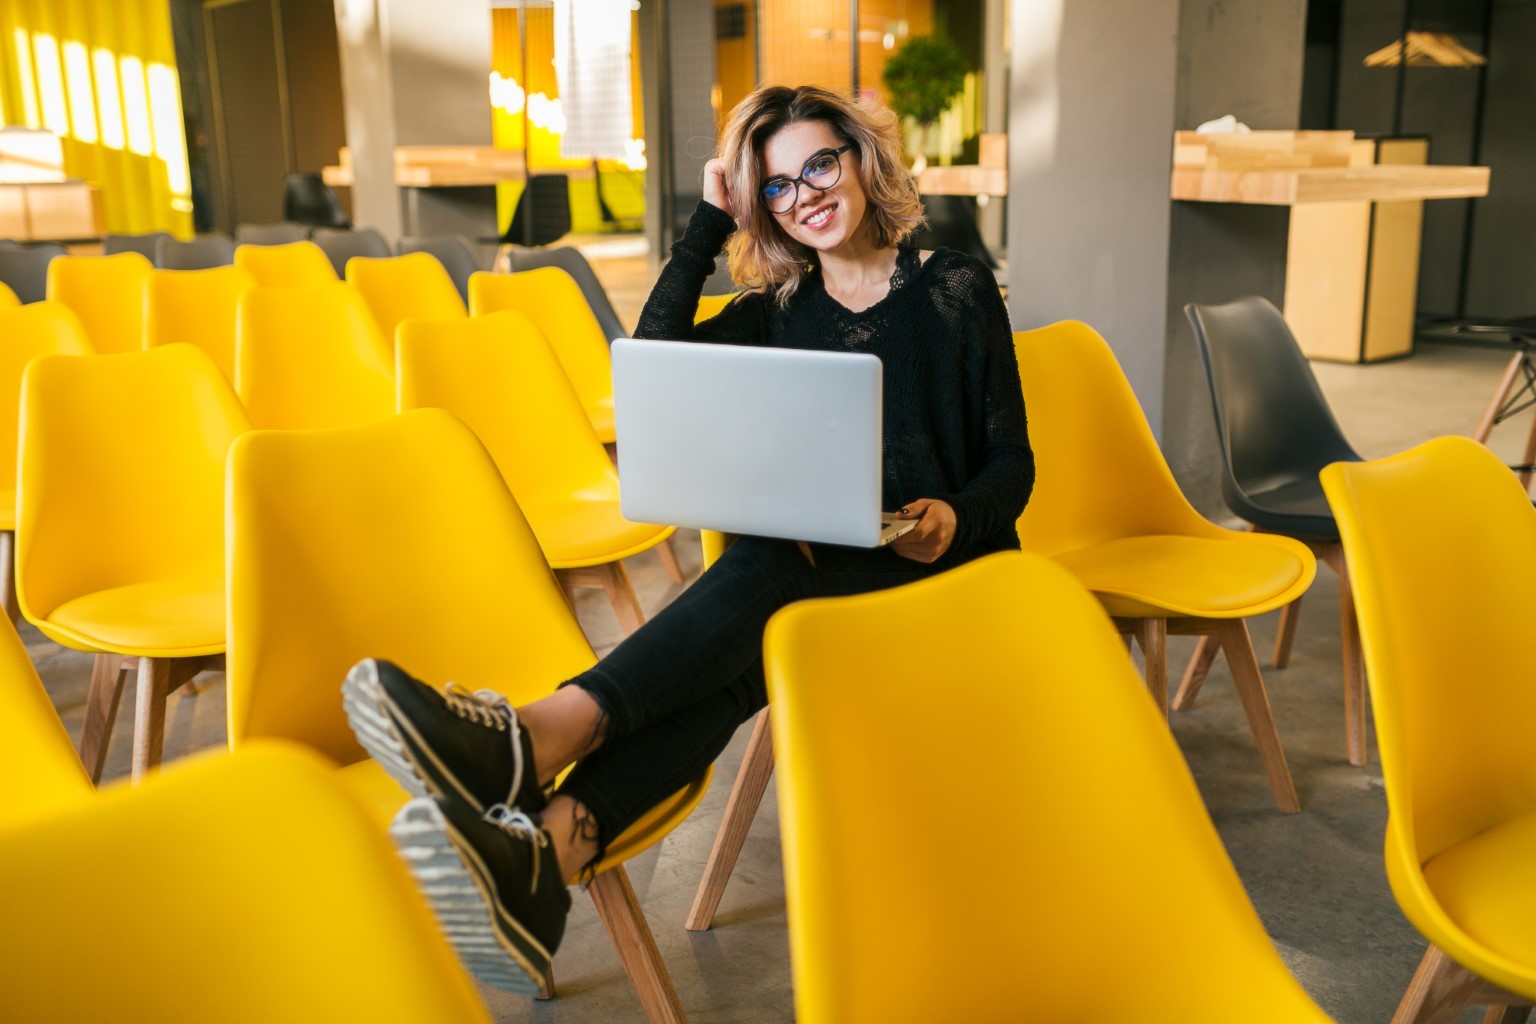 Woman with laptop on yellow chairs